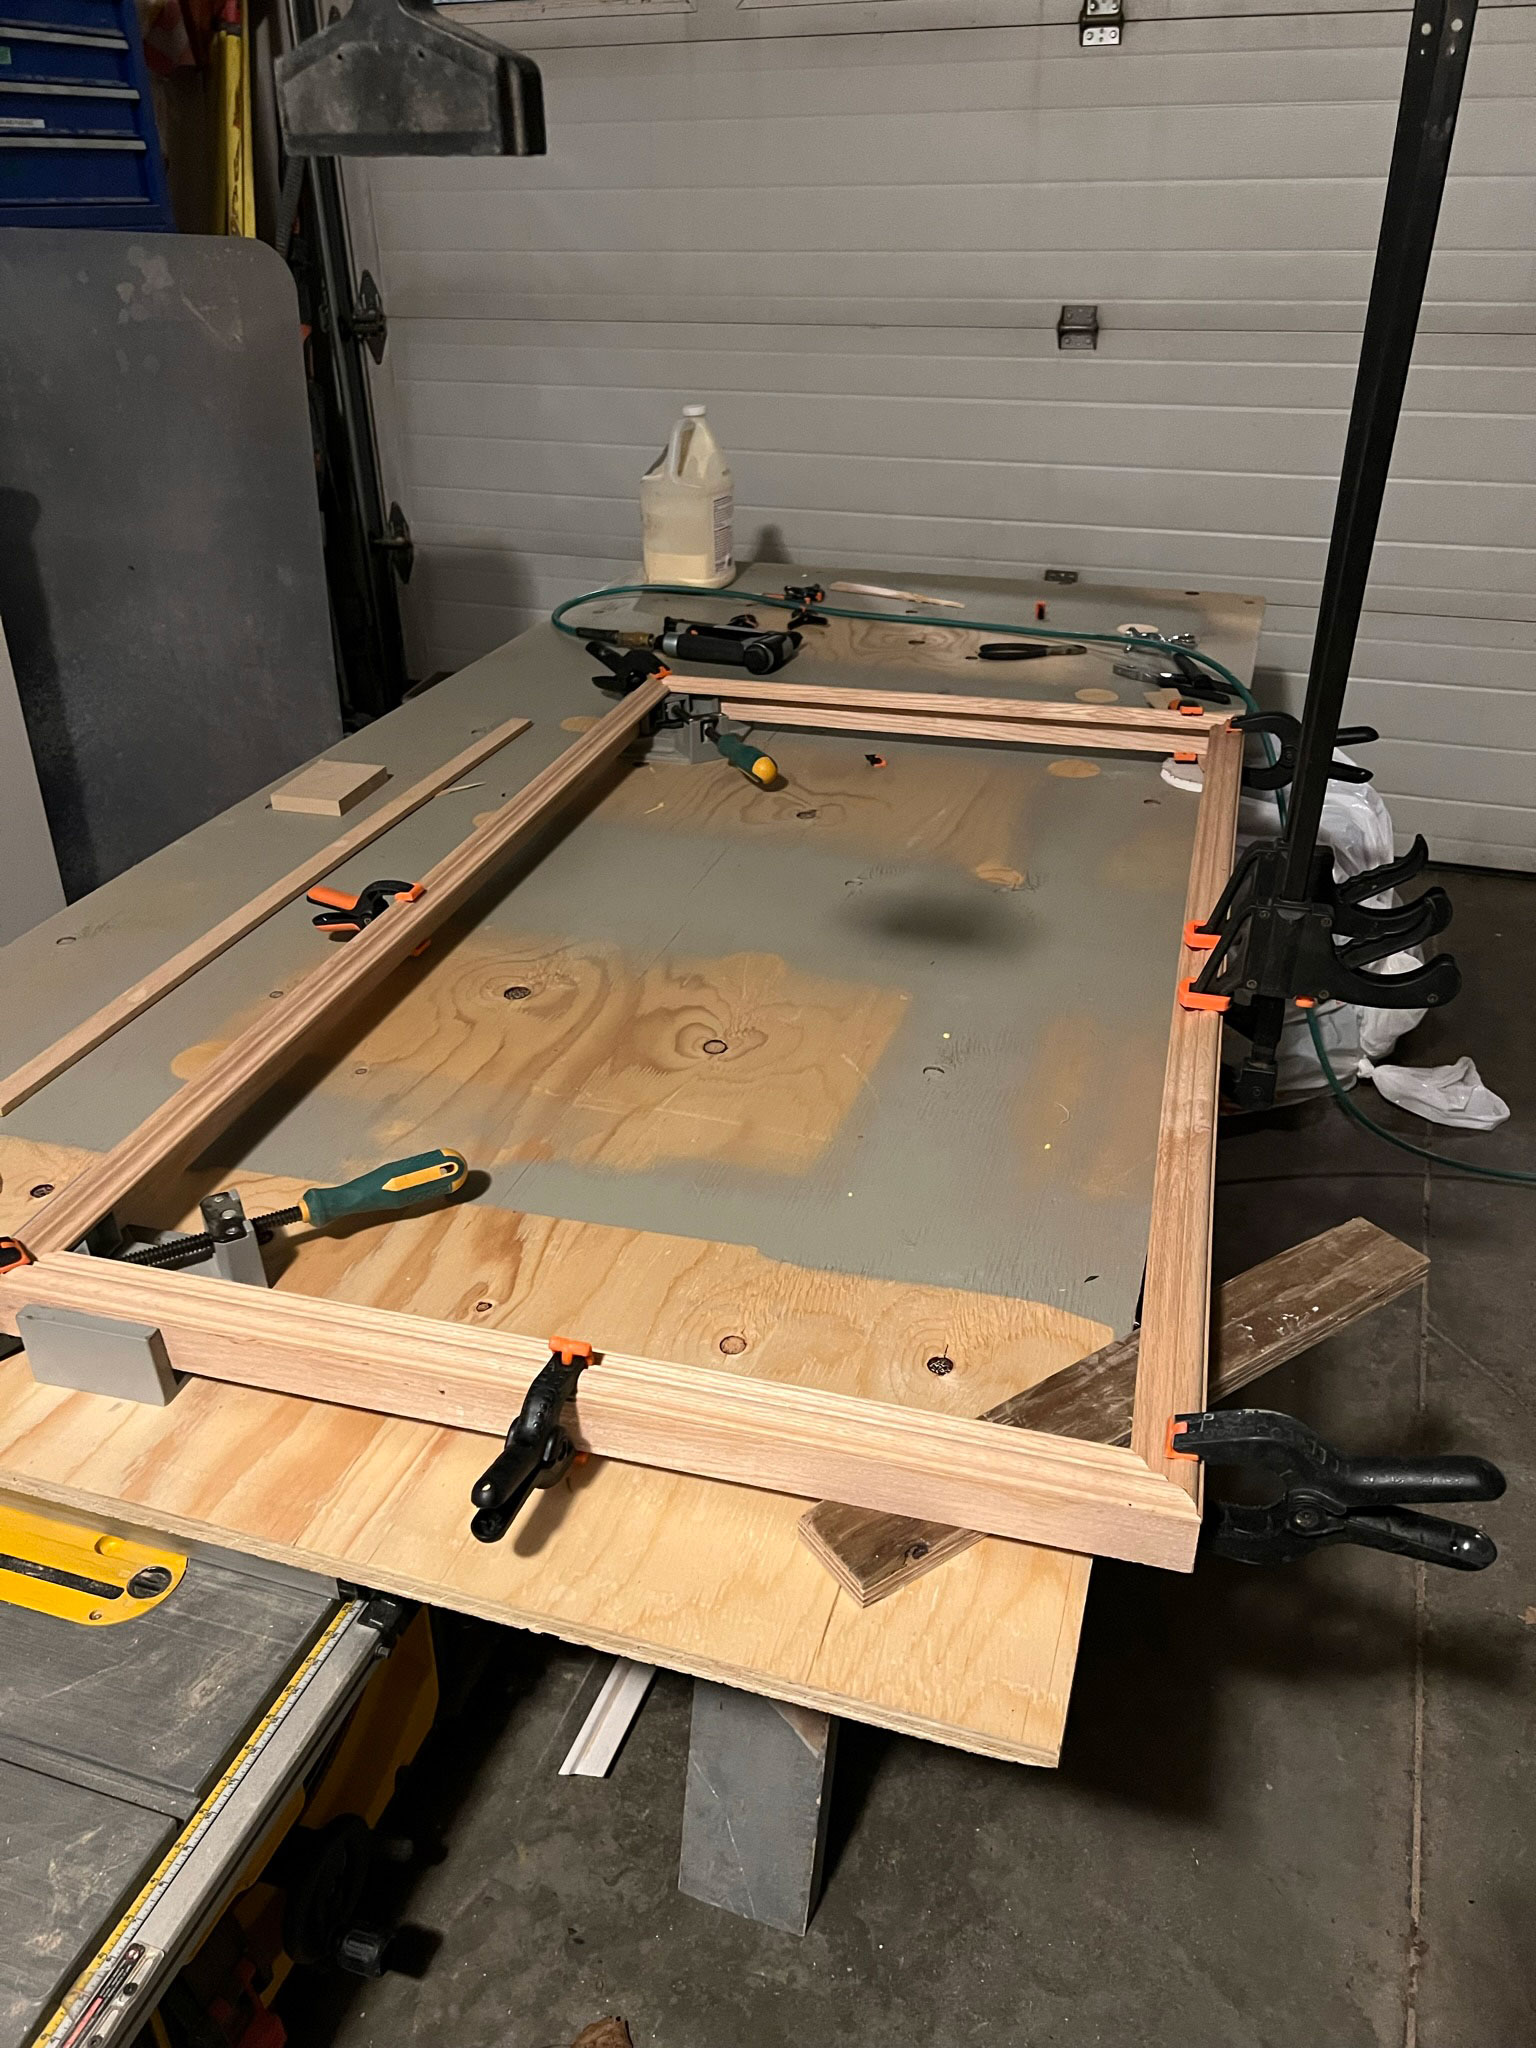 Frame with clamps all over